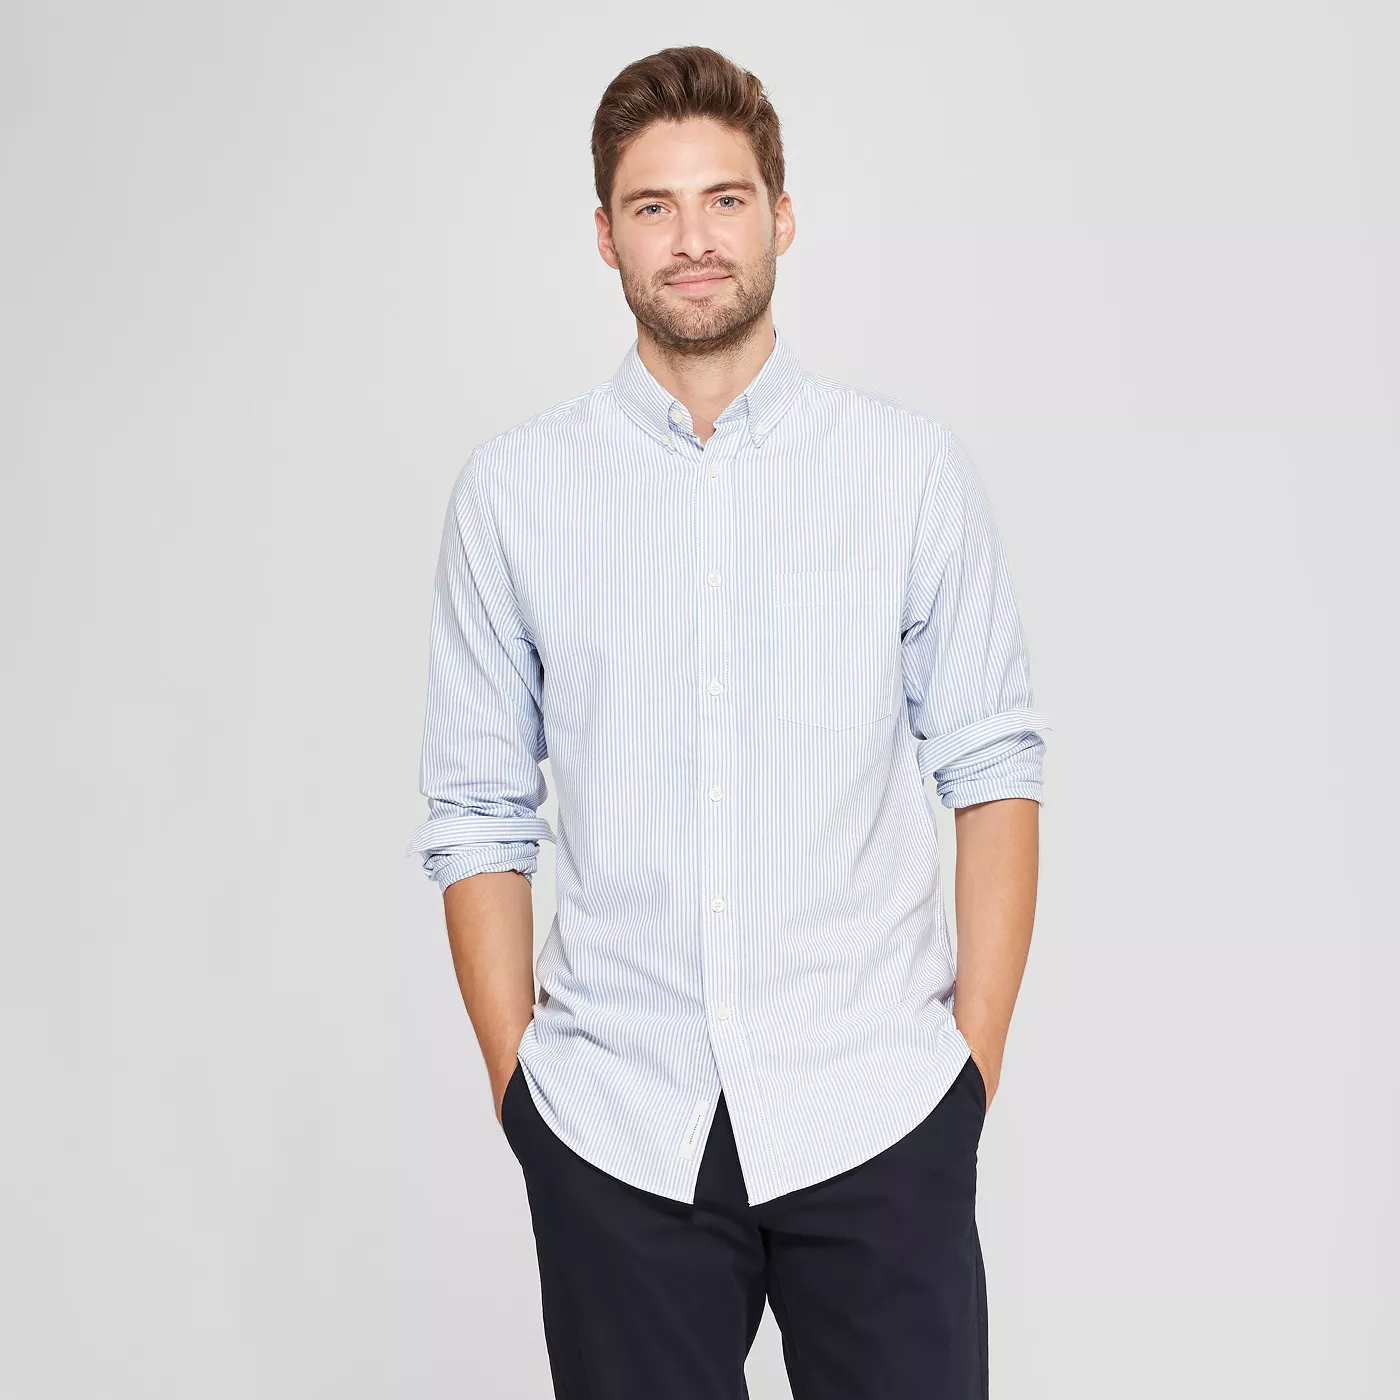 Men's Standard Fit Whittier Oxford Brushed Long Sleeve Collared Button-Down Shirt - Goodfellow & Coâ¢ - image 1 of 3